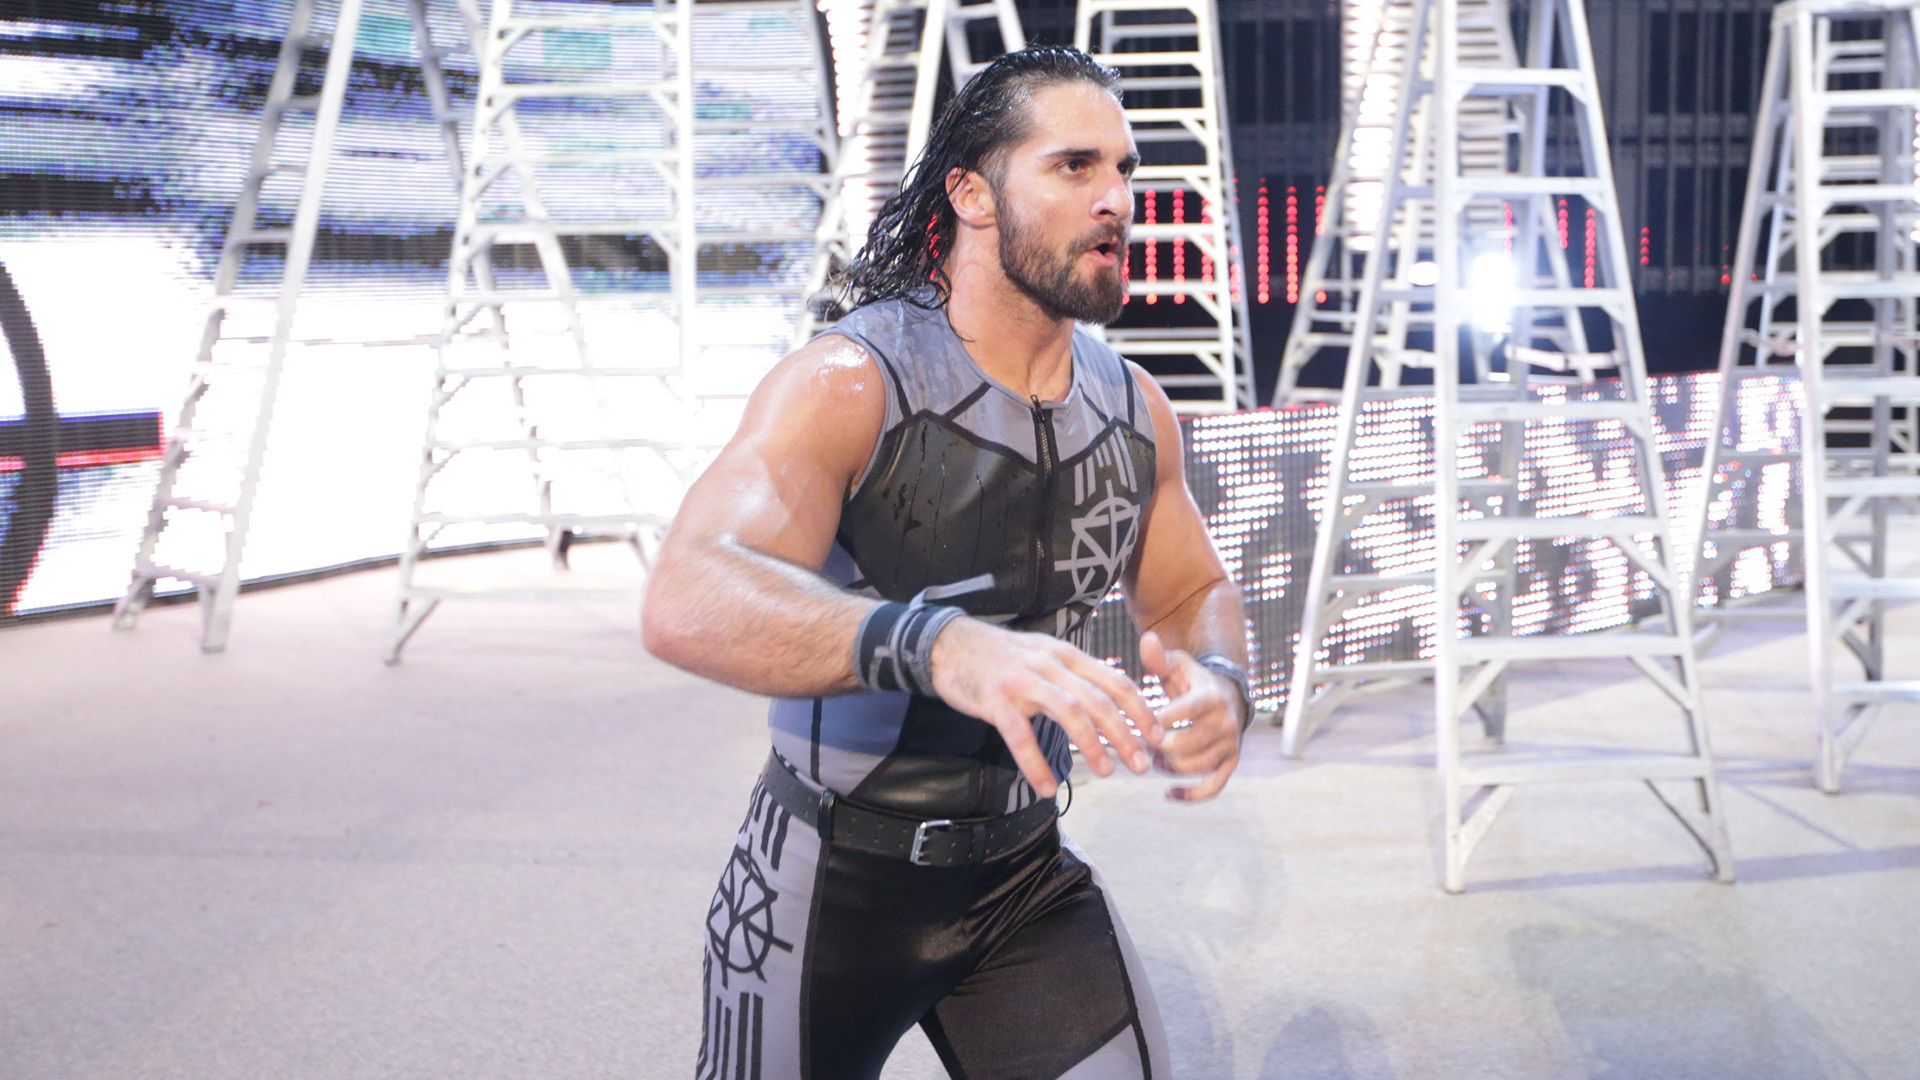 Seth Rollins def. WWE World Heavyweight Champion Roman Reigns Dean Ambrose cashed in his Money in the Bank contract to become WWE World Heavyweight